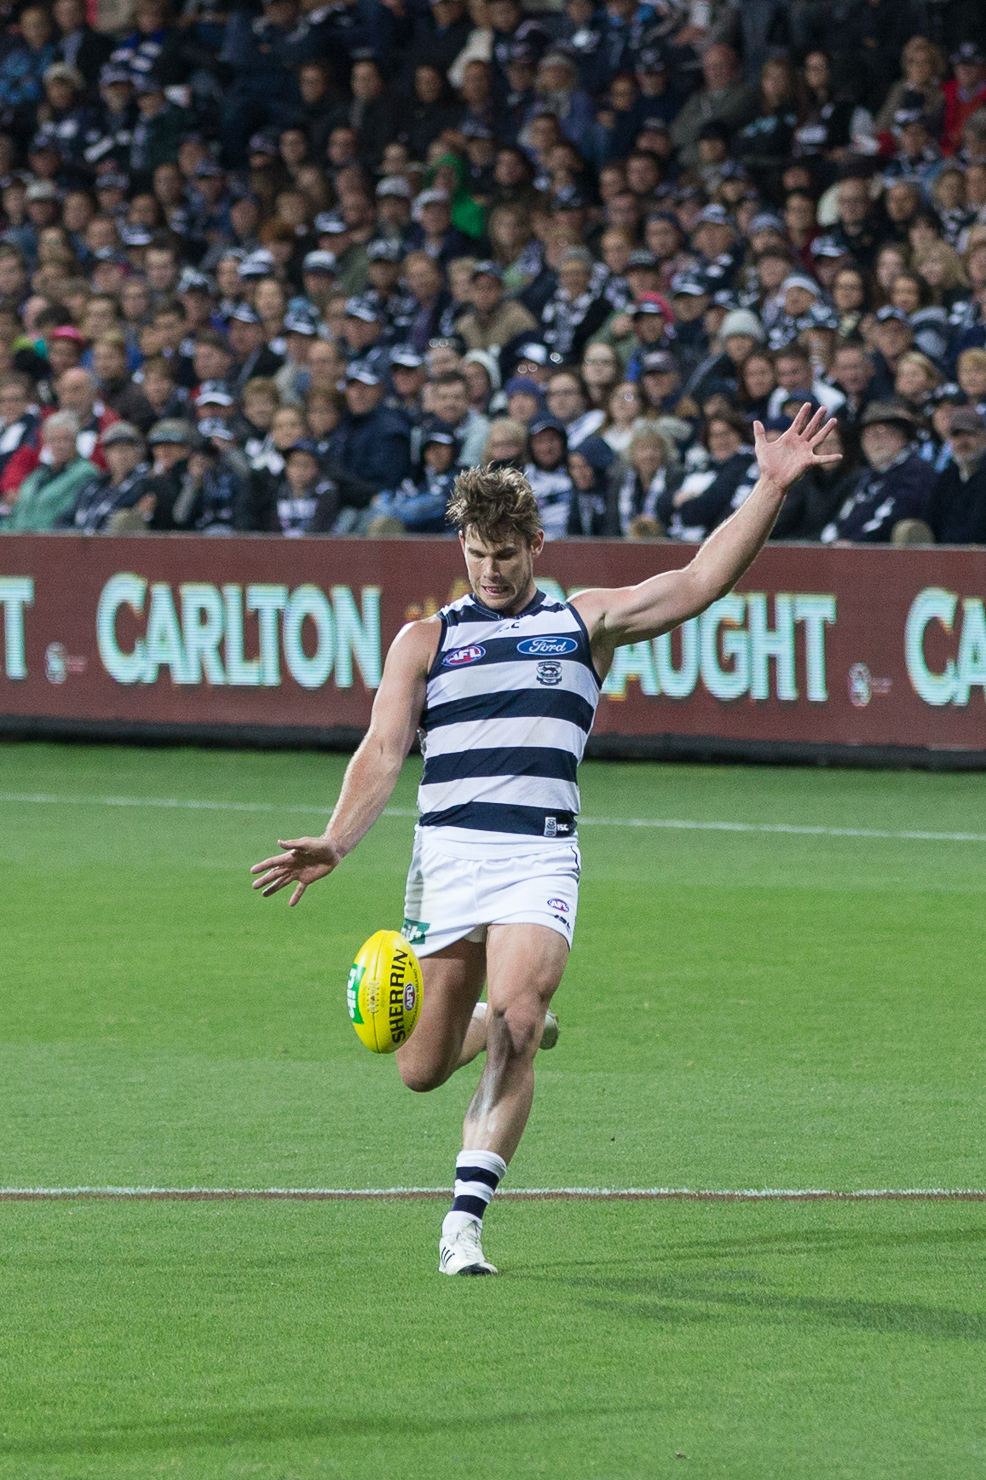 Friday 23rd May 2014 - Geelong defeat North Melbourne